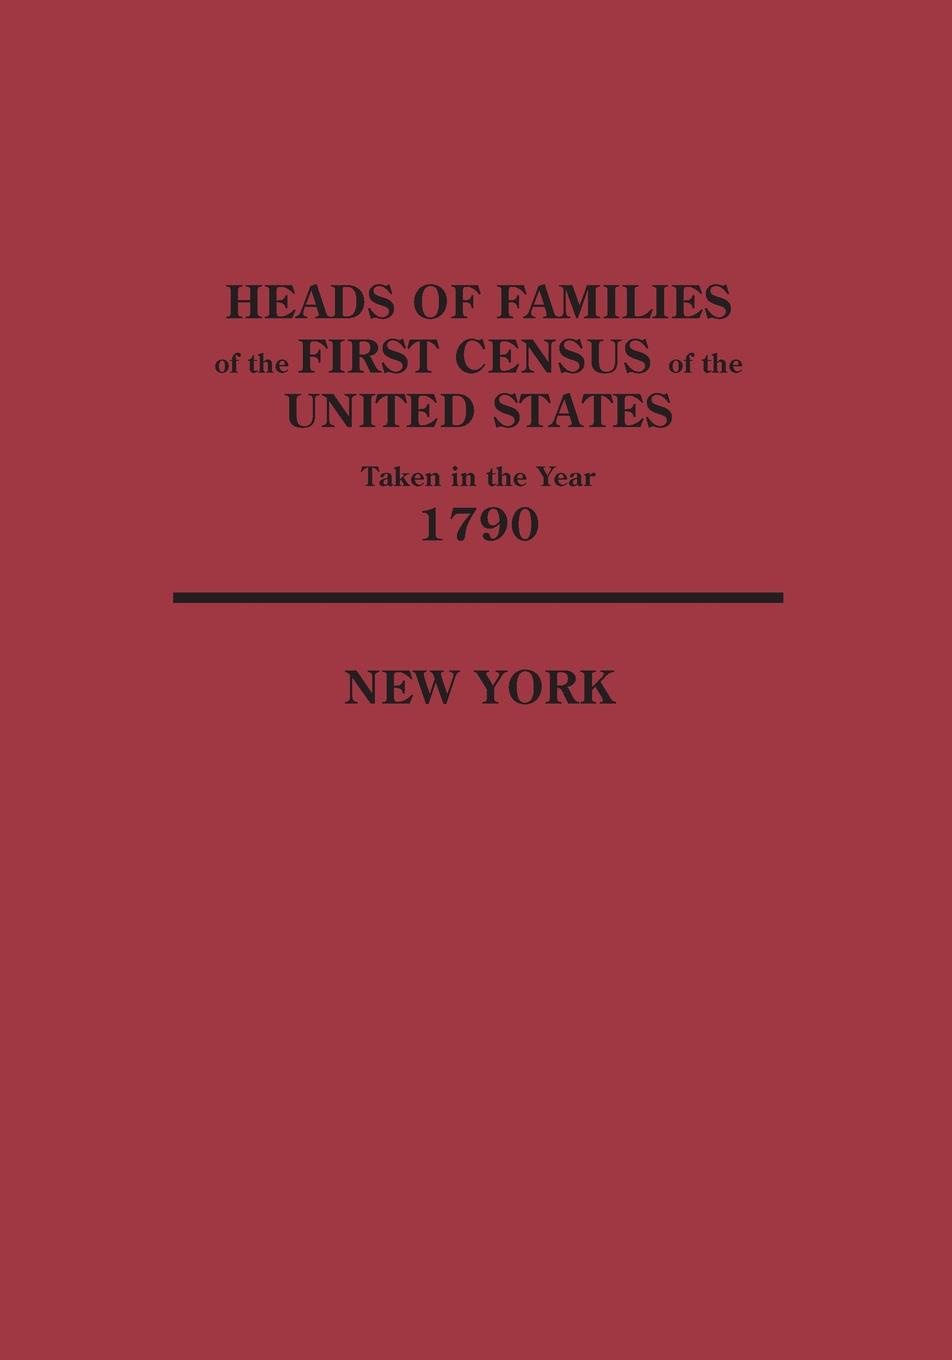 Heads of Families at the First Census of the United States Taken in the Year 1790. New York